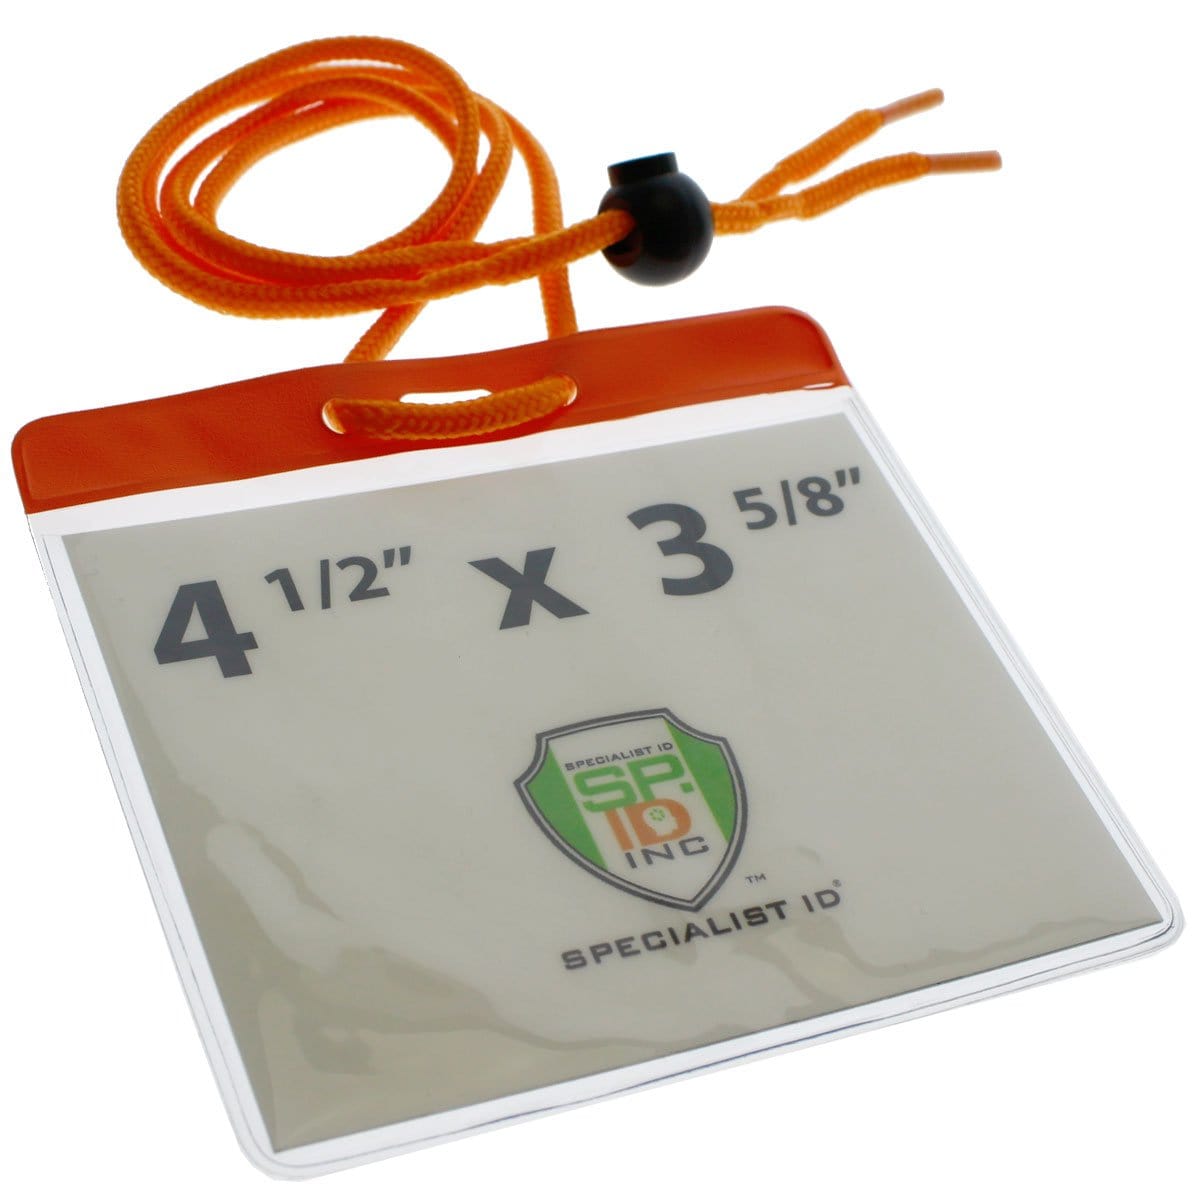 4x3 Inch Color Bar Event Badge with Adjustable Lanyard - Extra Large (Max Insert 4 3/8 X 3 1/2) Colored Name Badge with Matching Color Code Lanyard (1860-290X). The extra-large vinyl ID badge holder displays dimensions of 4 1/2" x 3 5/8" and showcases a Specialist ID Inc logo.